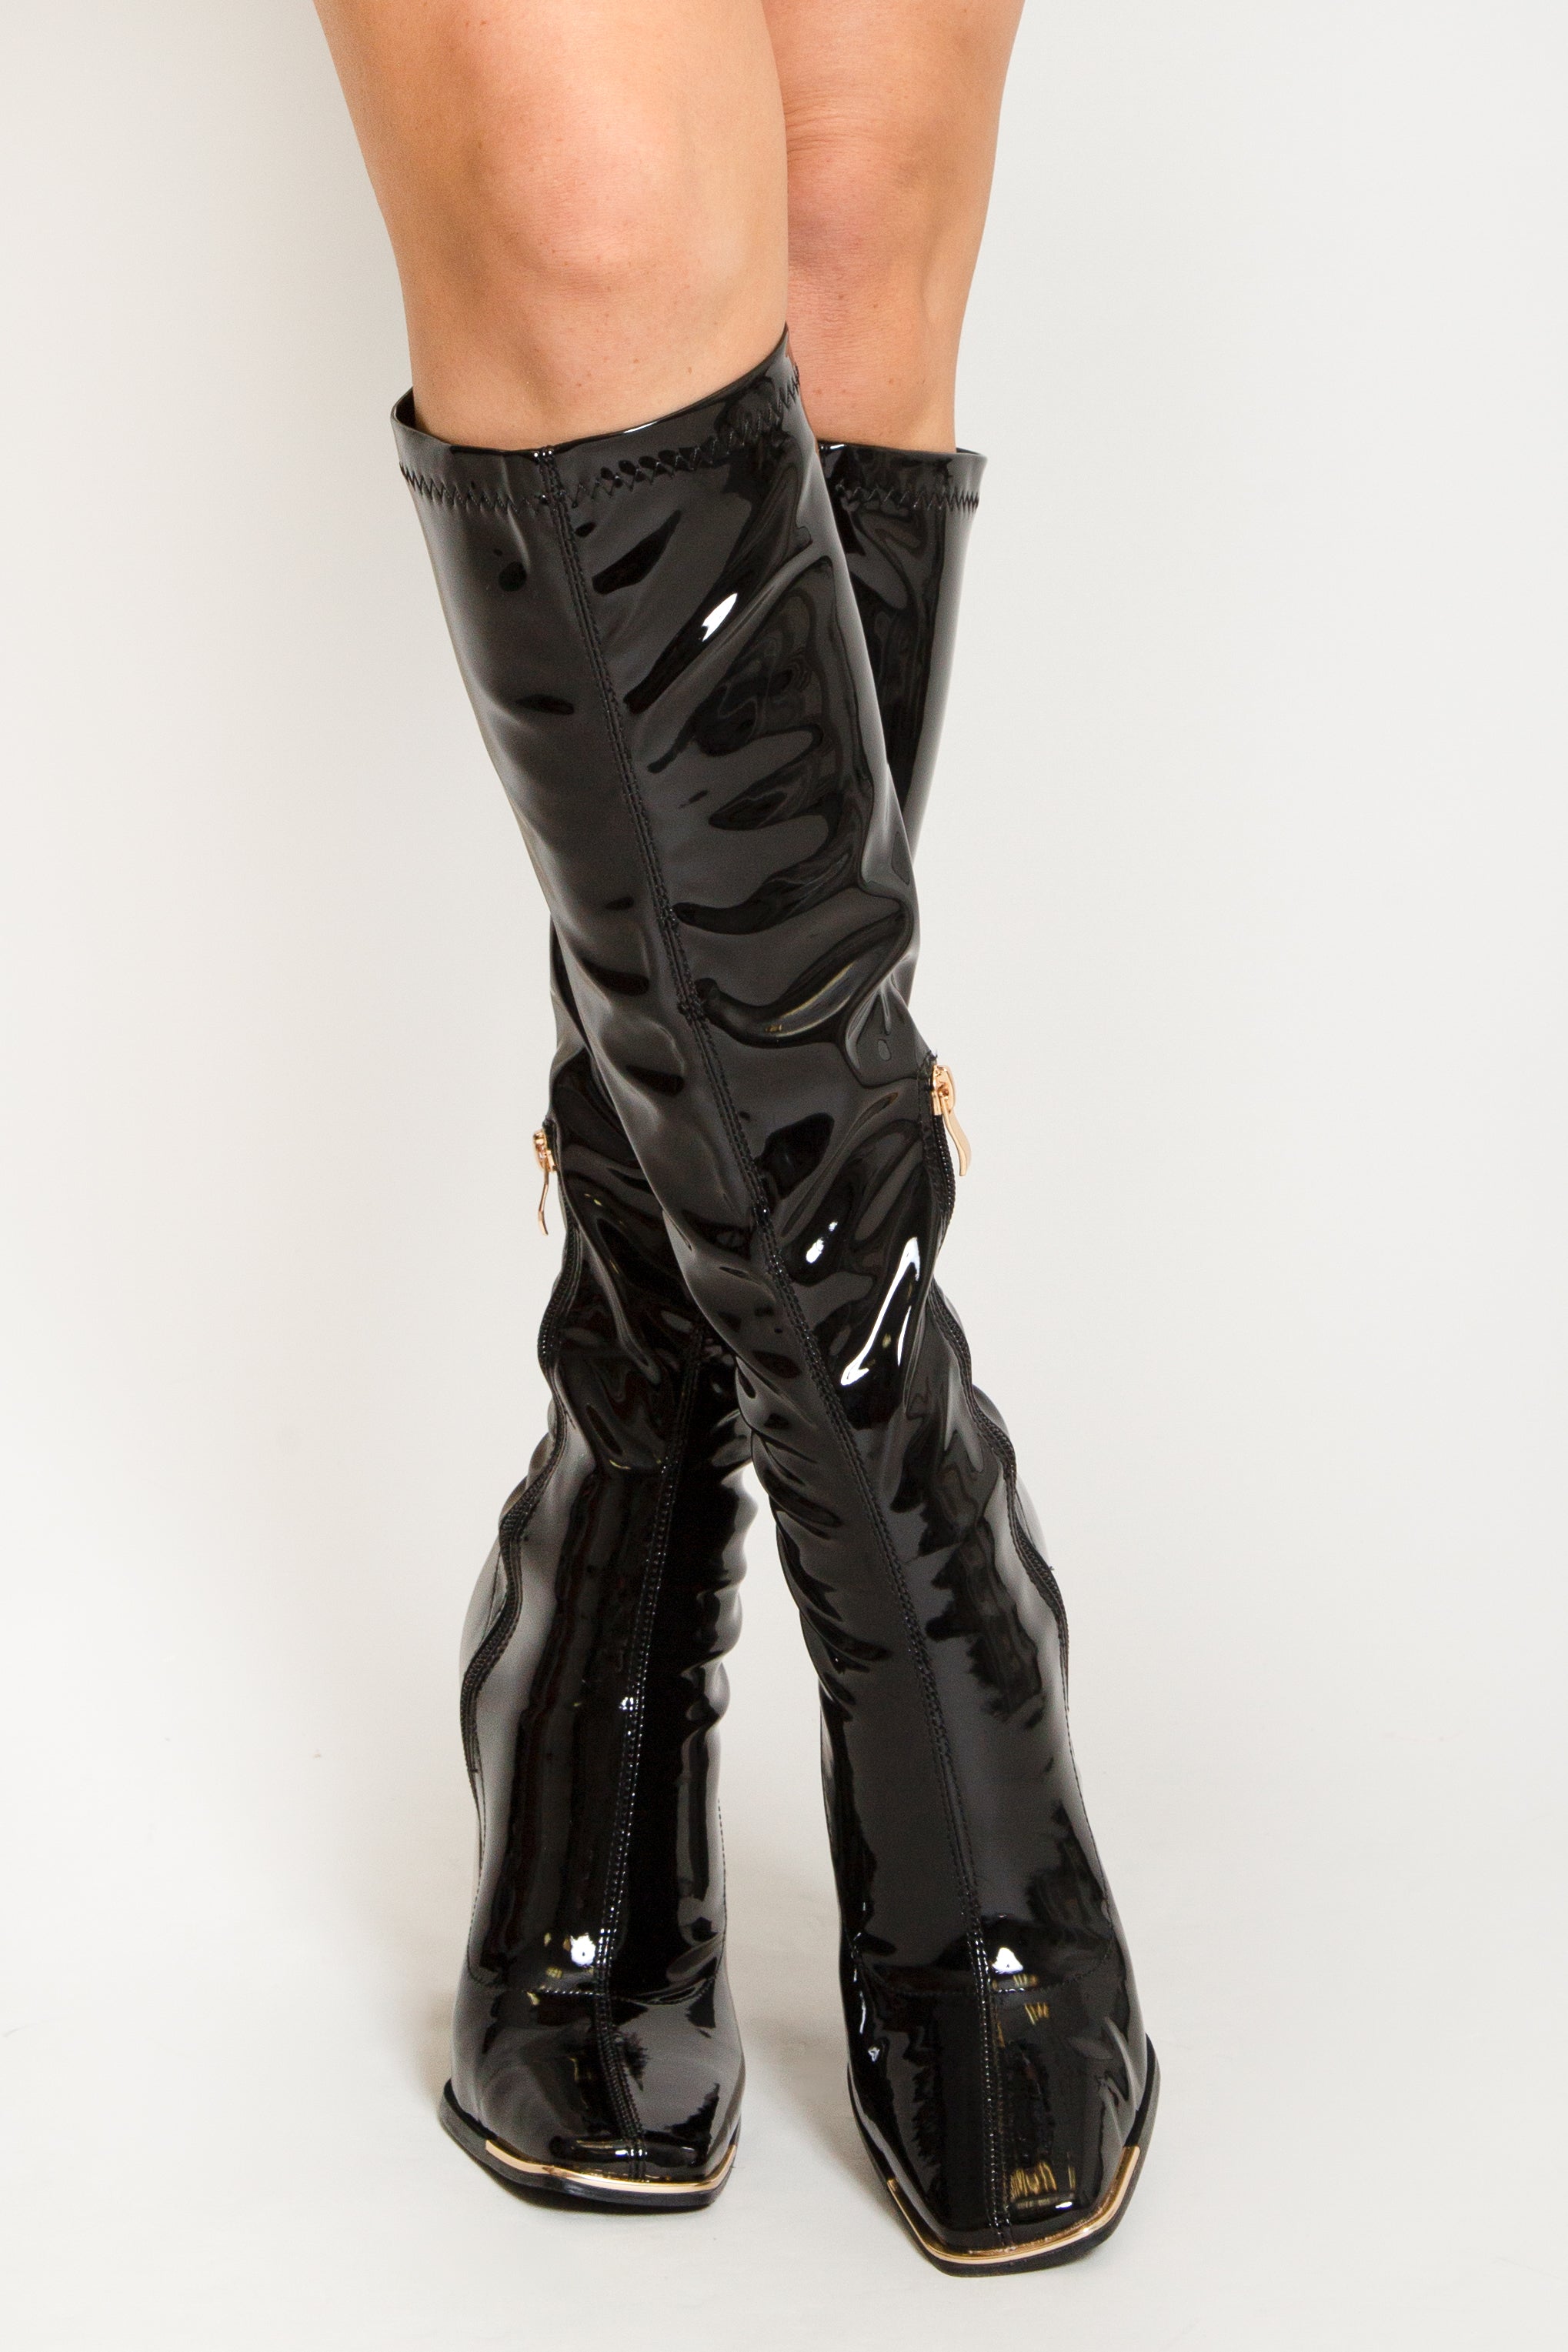 Leilani - Closed Toe Lace Up Over The Knee Dance Boots (Street Sole) –  Adore Dance Shoes